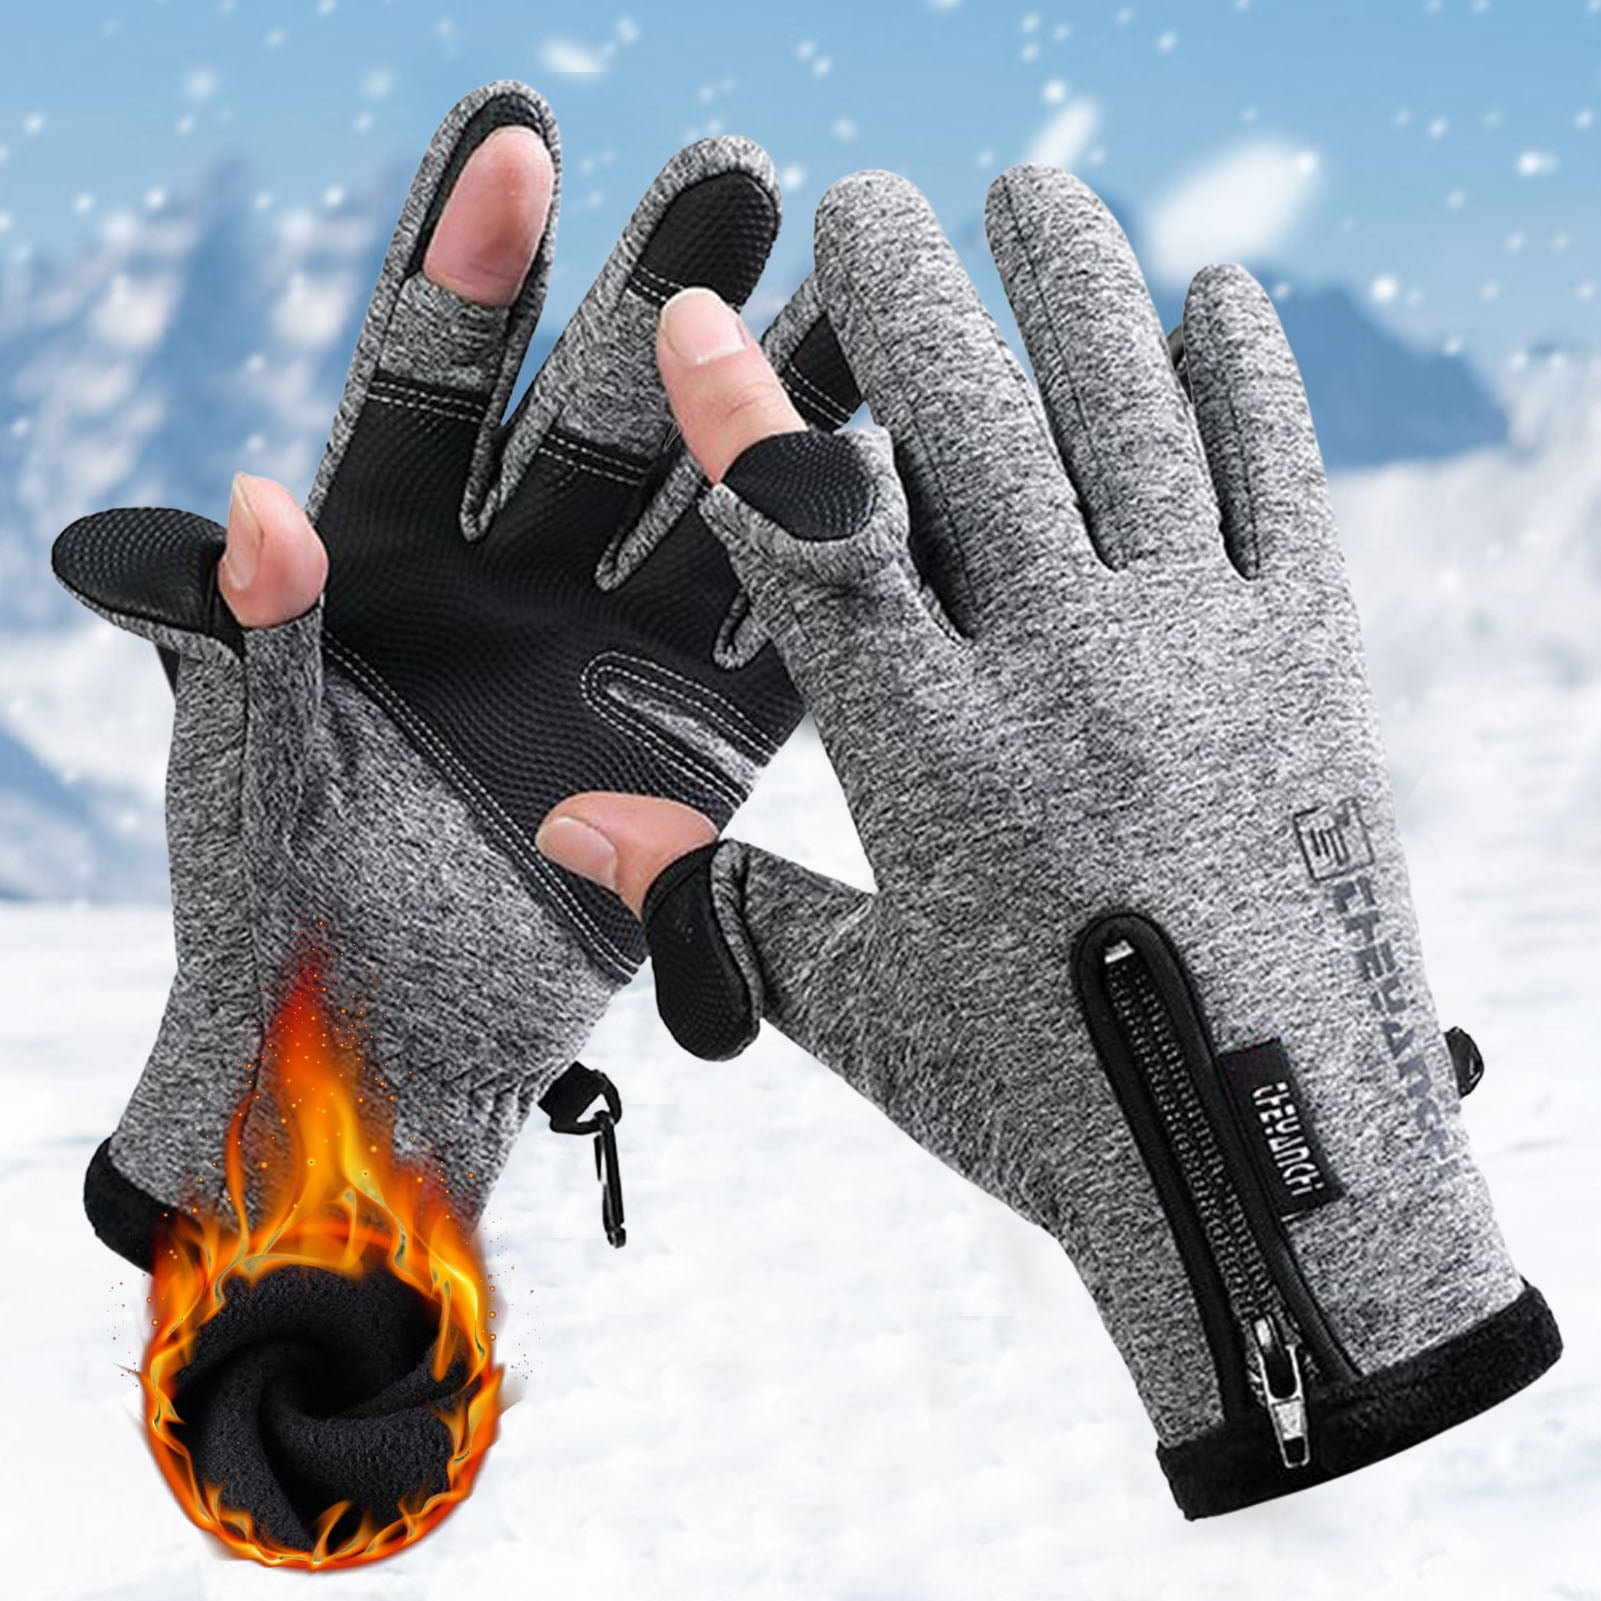 USB Heating Gloves 1 PairTouch Screen Zipper Cuffs Letter Print Fingertip  Opening Winter Adjustable Temperature Fishing Gloves,Grey 